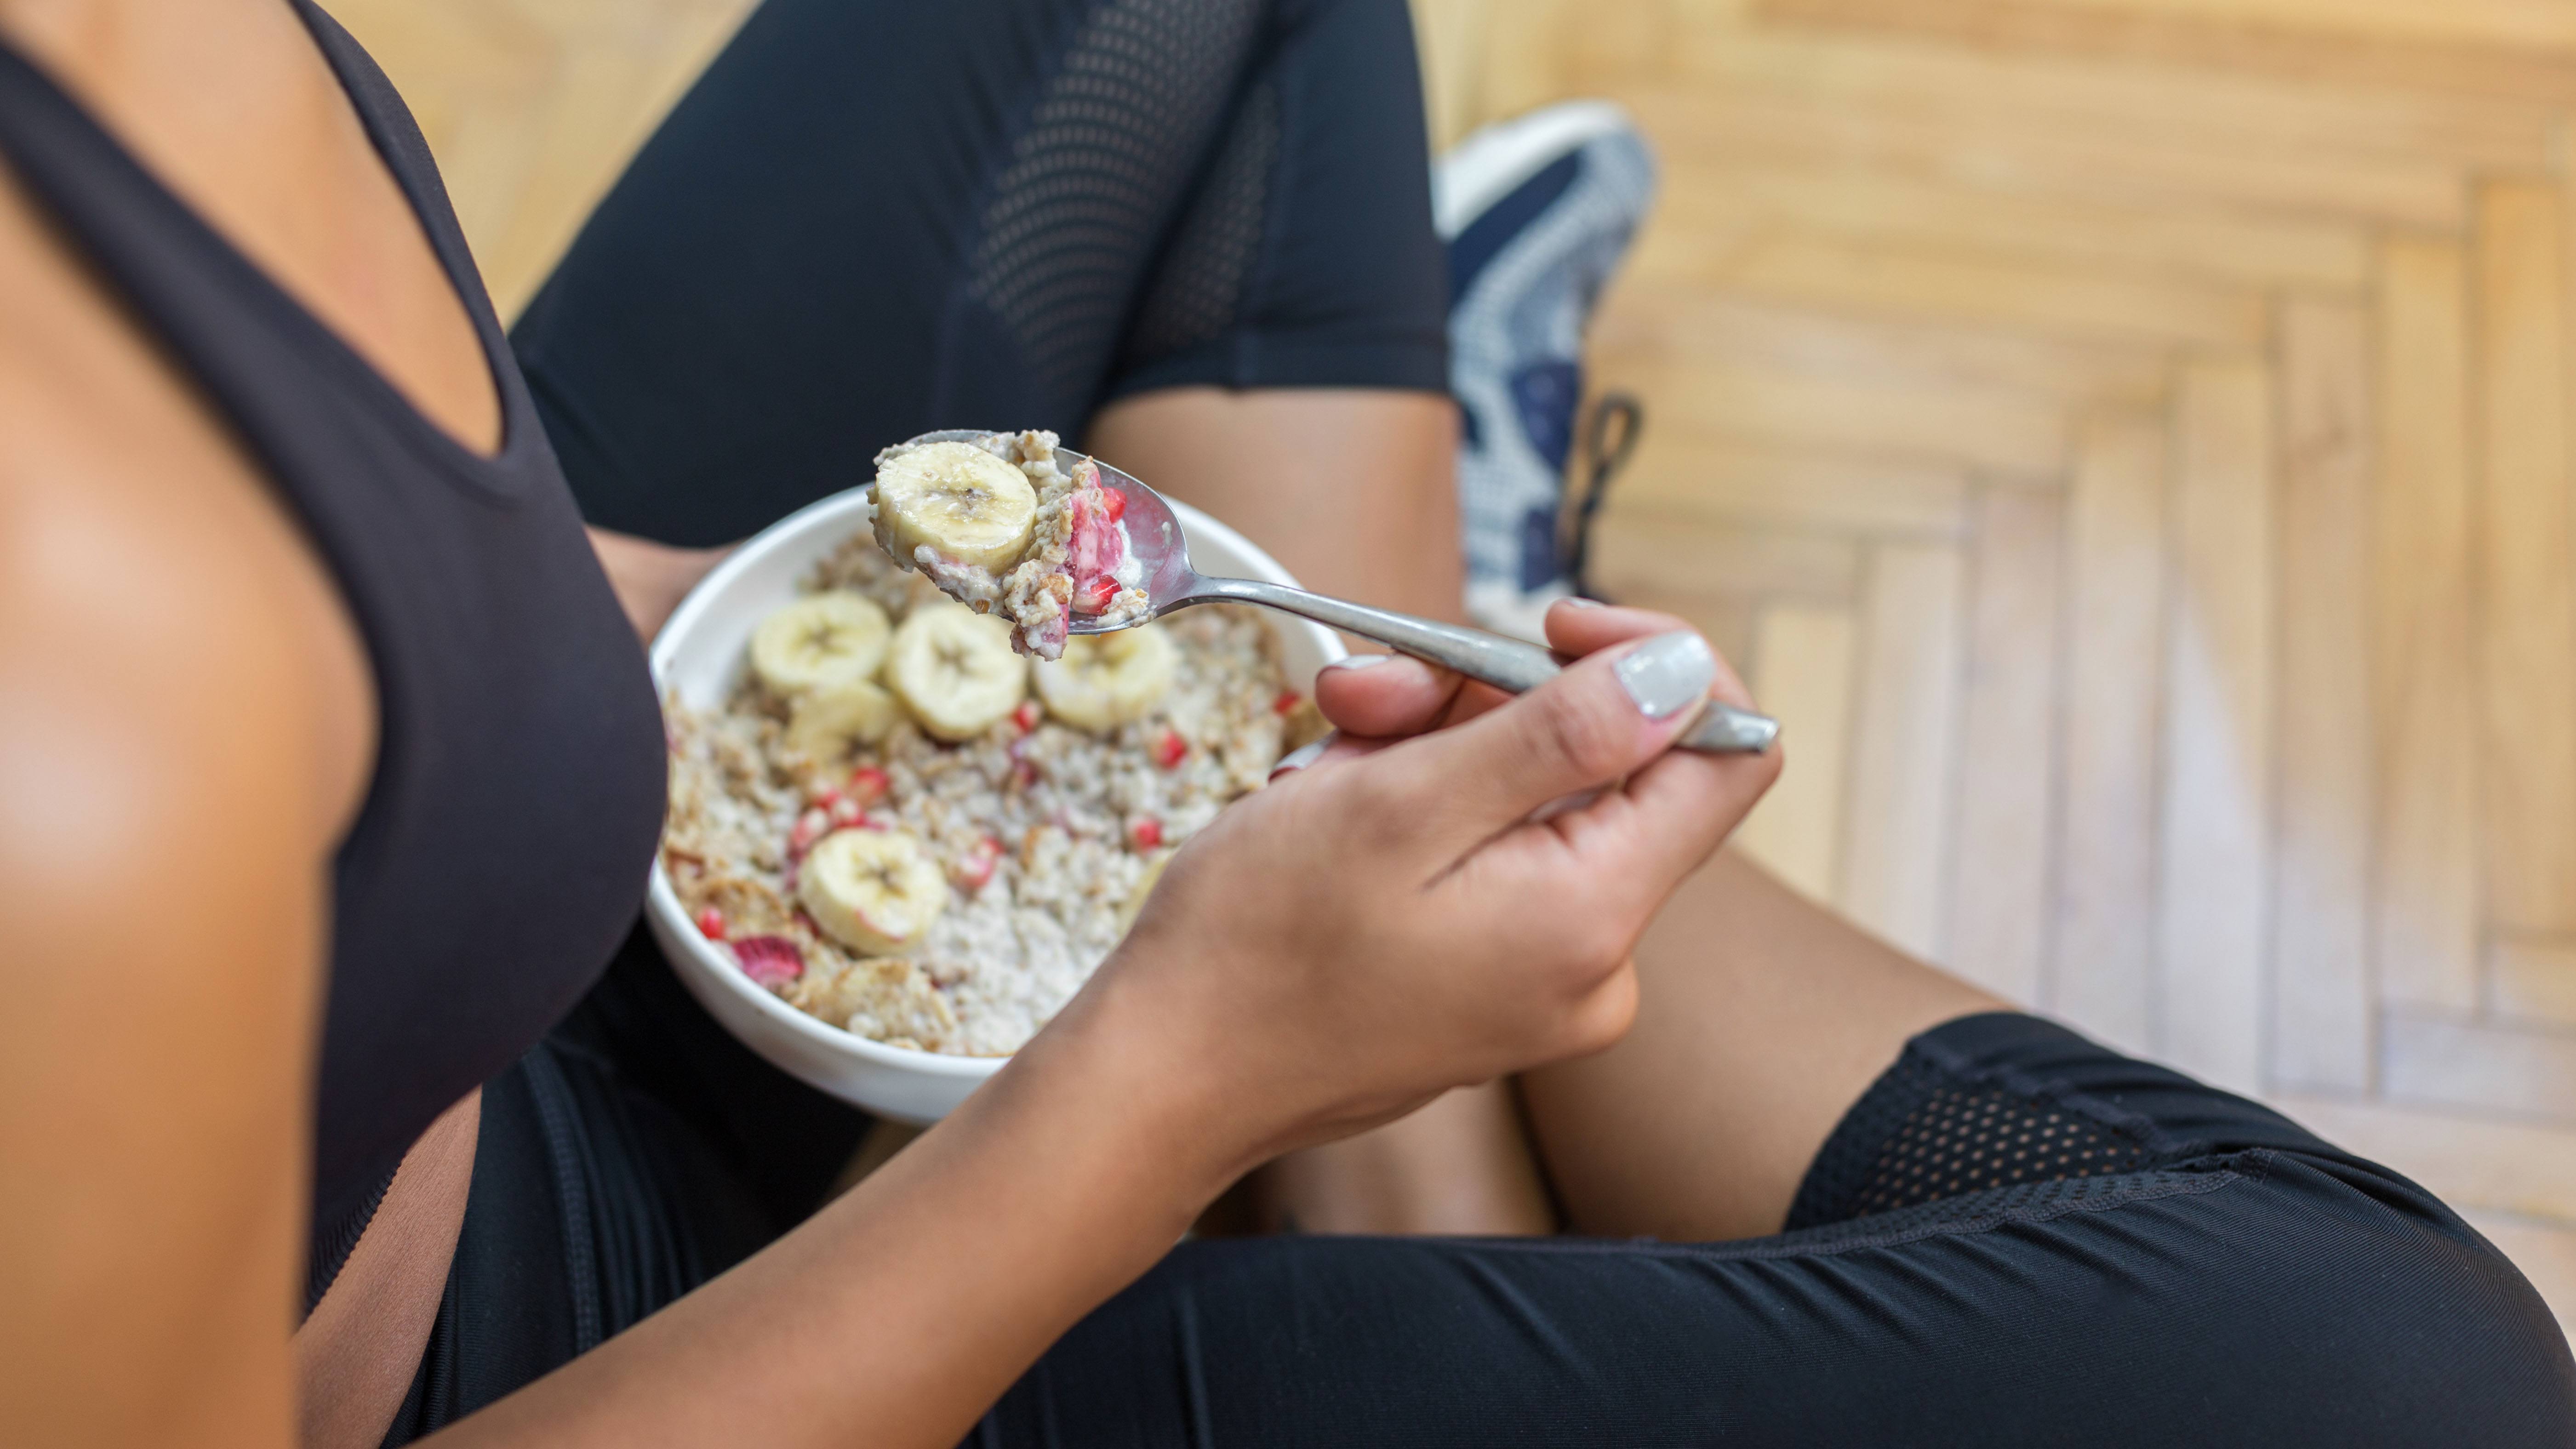 Woman in workout clothes eating oatmeal and berries